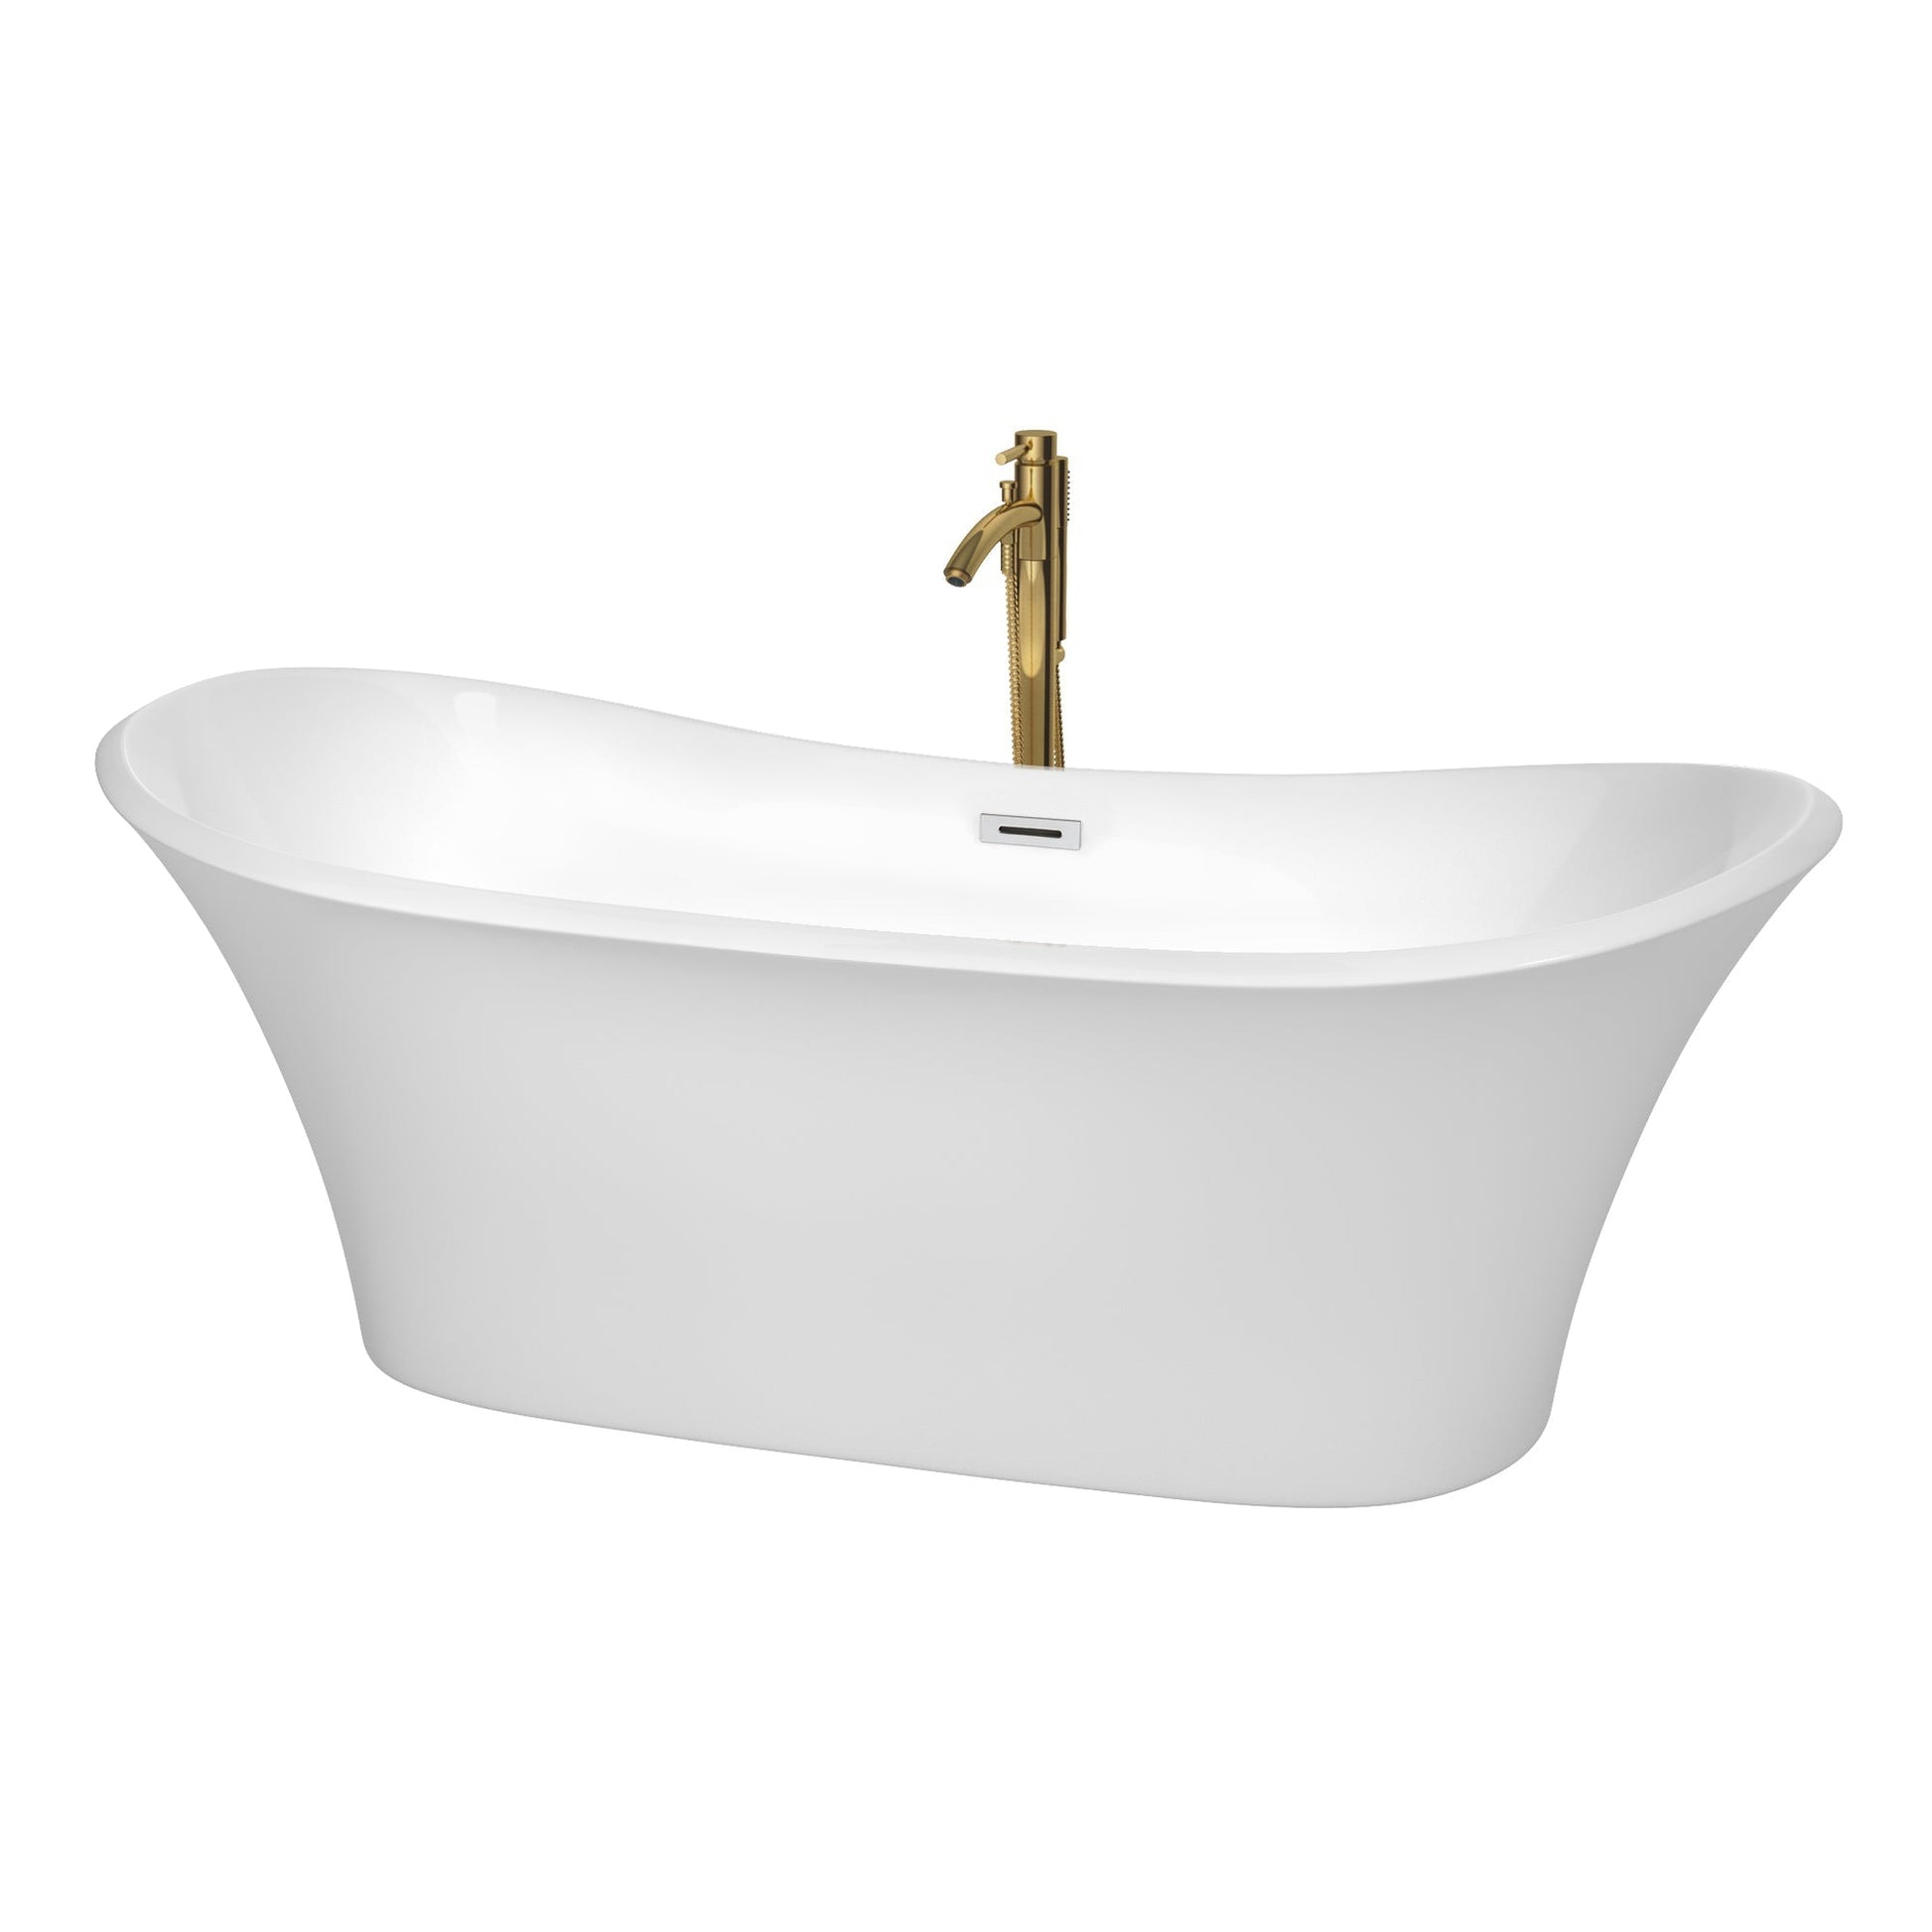 Wyndham Collection Bolera 71" Freestanding Bathtub in White With Polished Chrome Trim and Floor Mounted Faucet in Brushed Gold